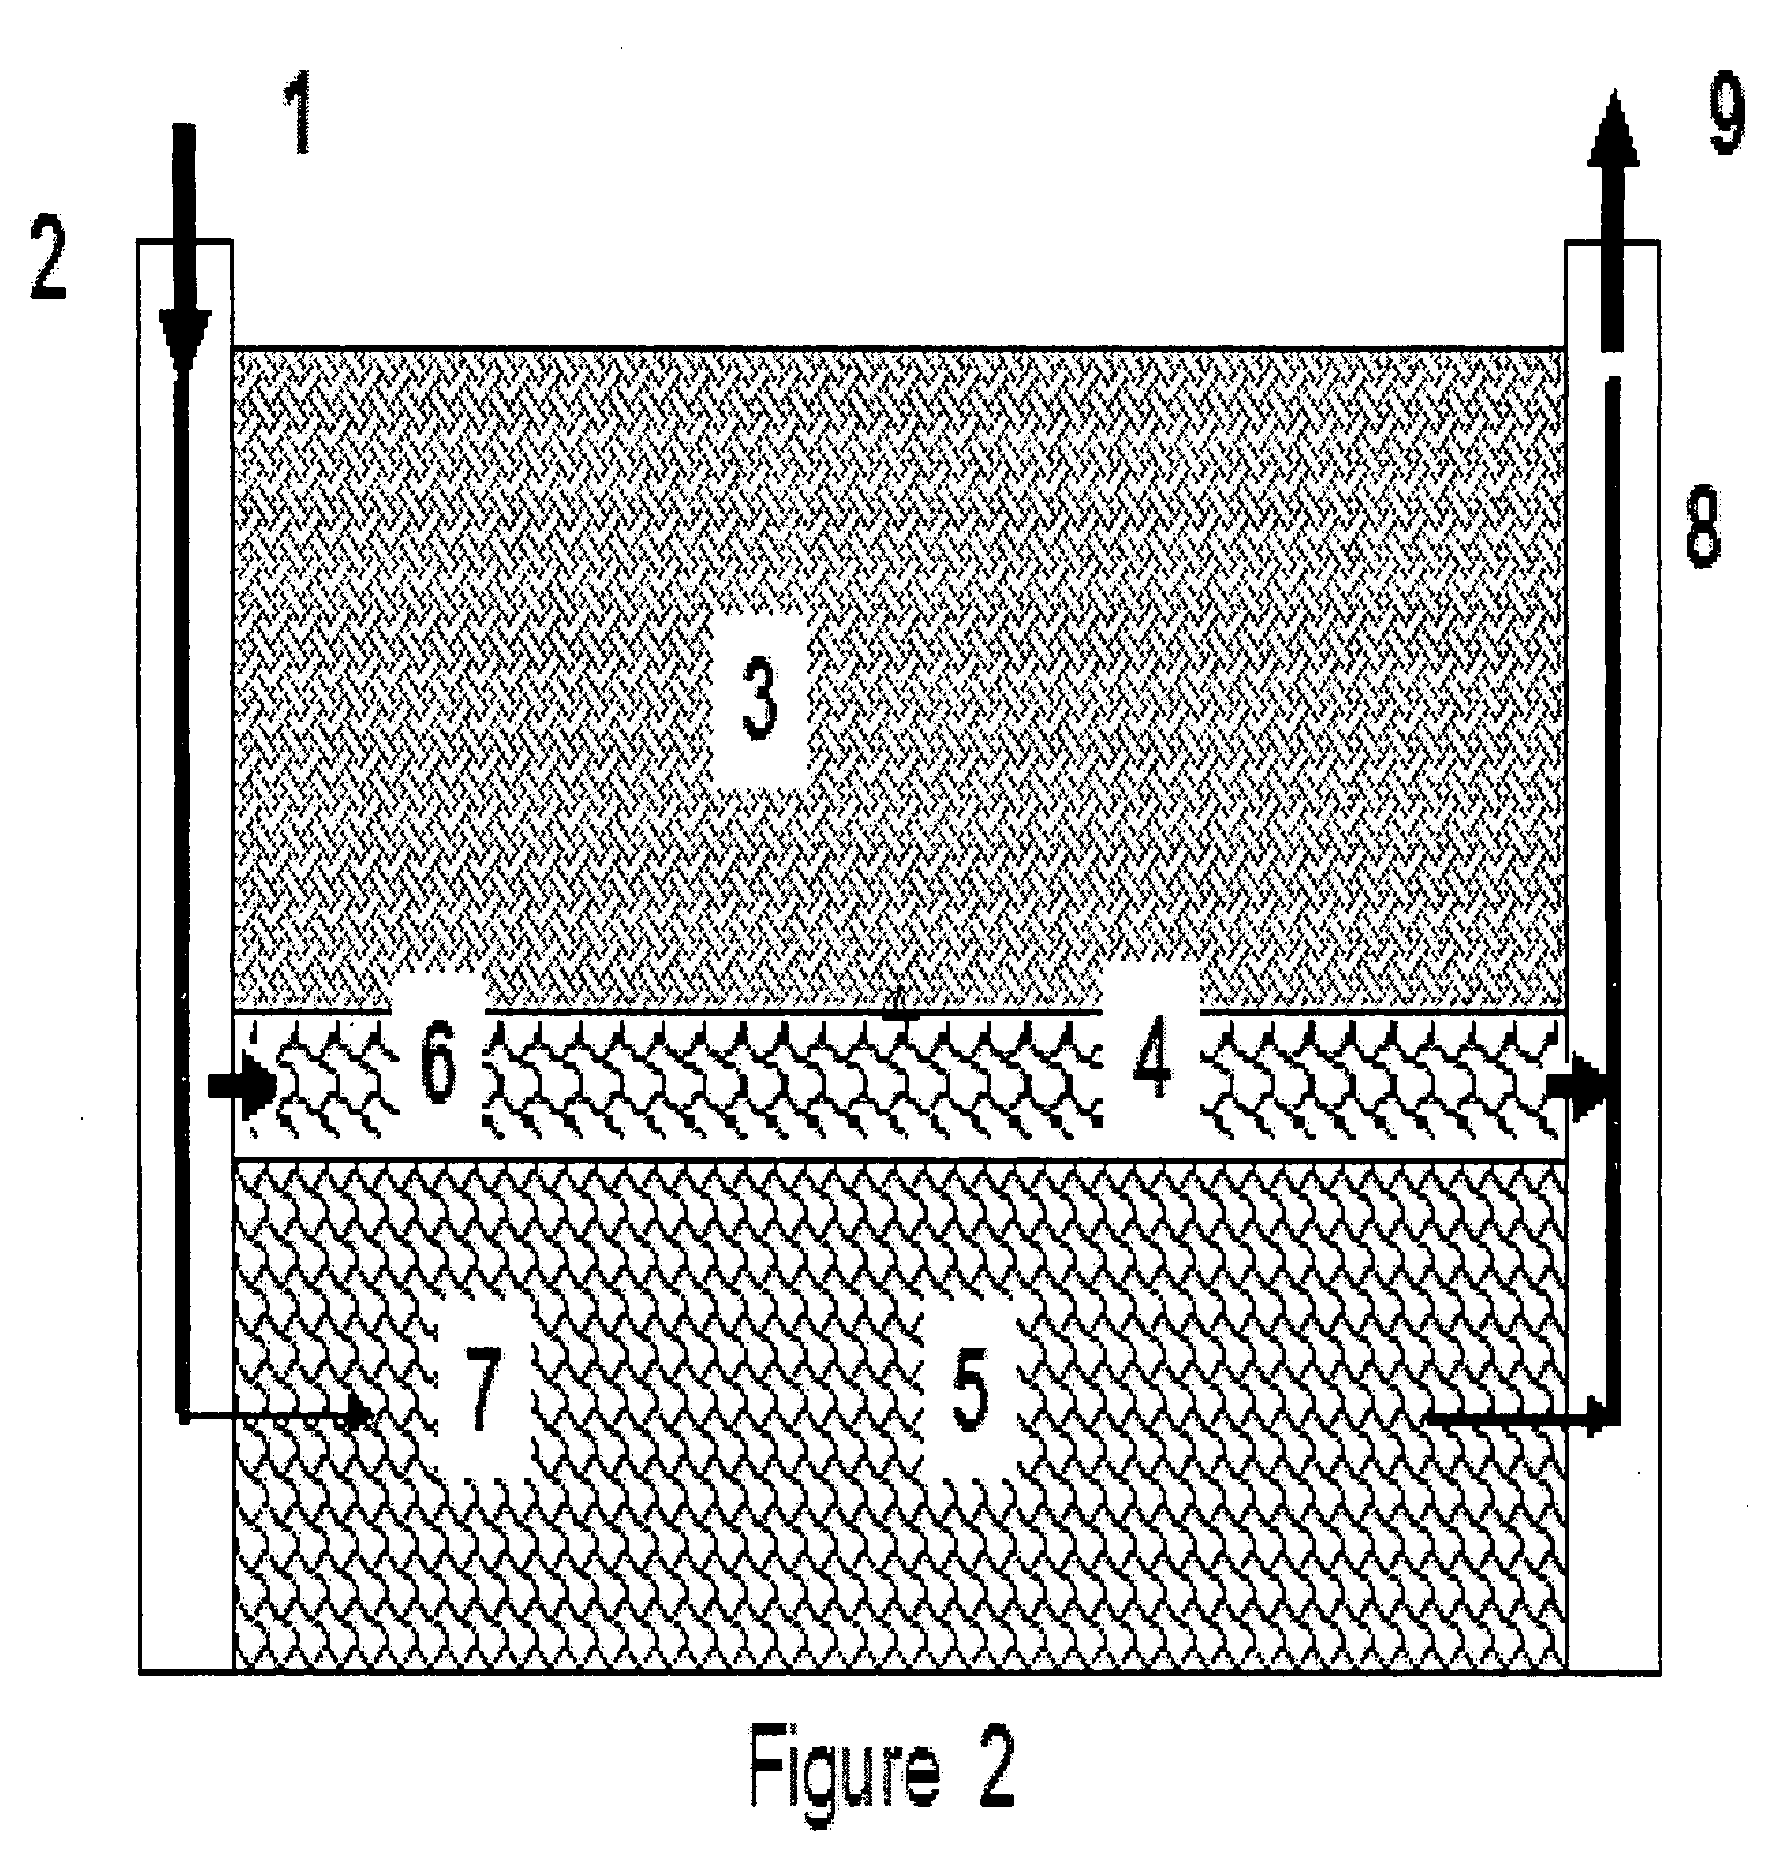 Preformed particle gel for conformance control in an oil reservoir